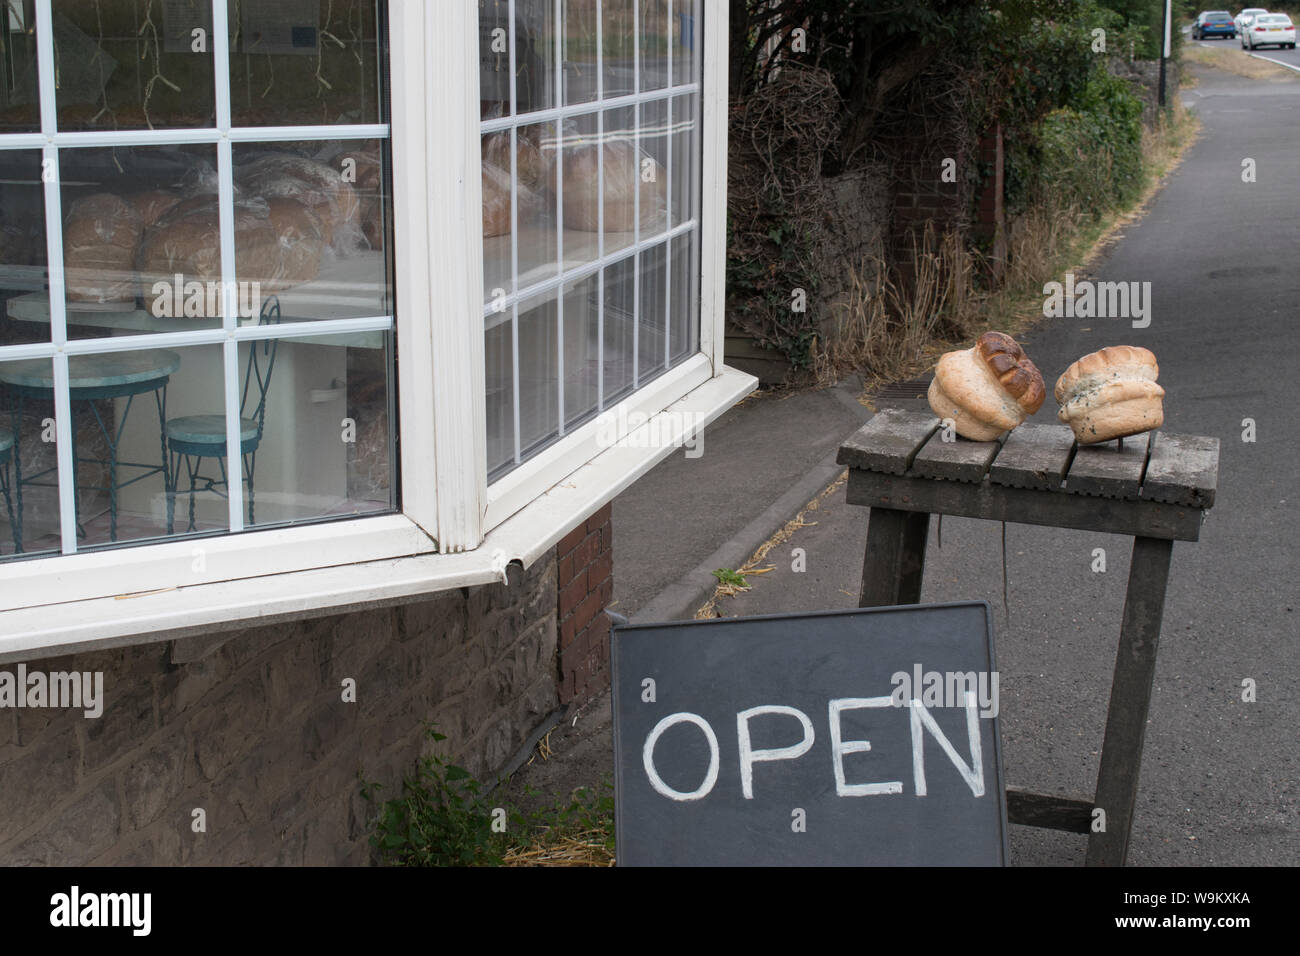 Bread shop artisan bakery loafs of bread on table outside small local shops advertising that they are open for business Wiltshire UK 2019 HOMER SYKES Stock Photo